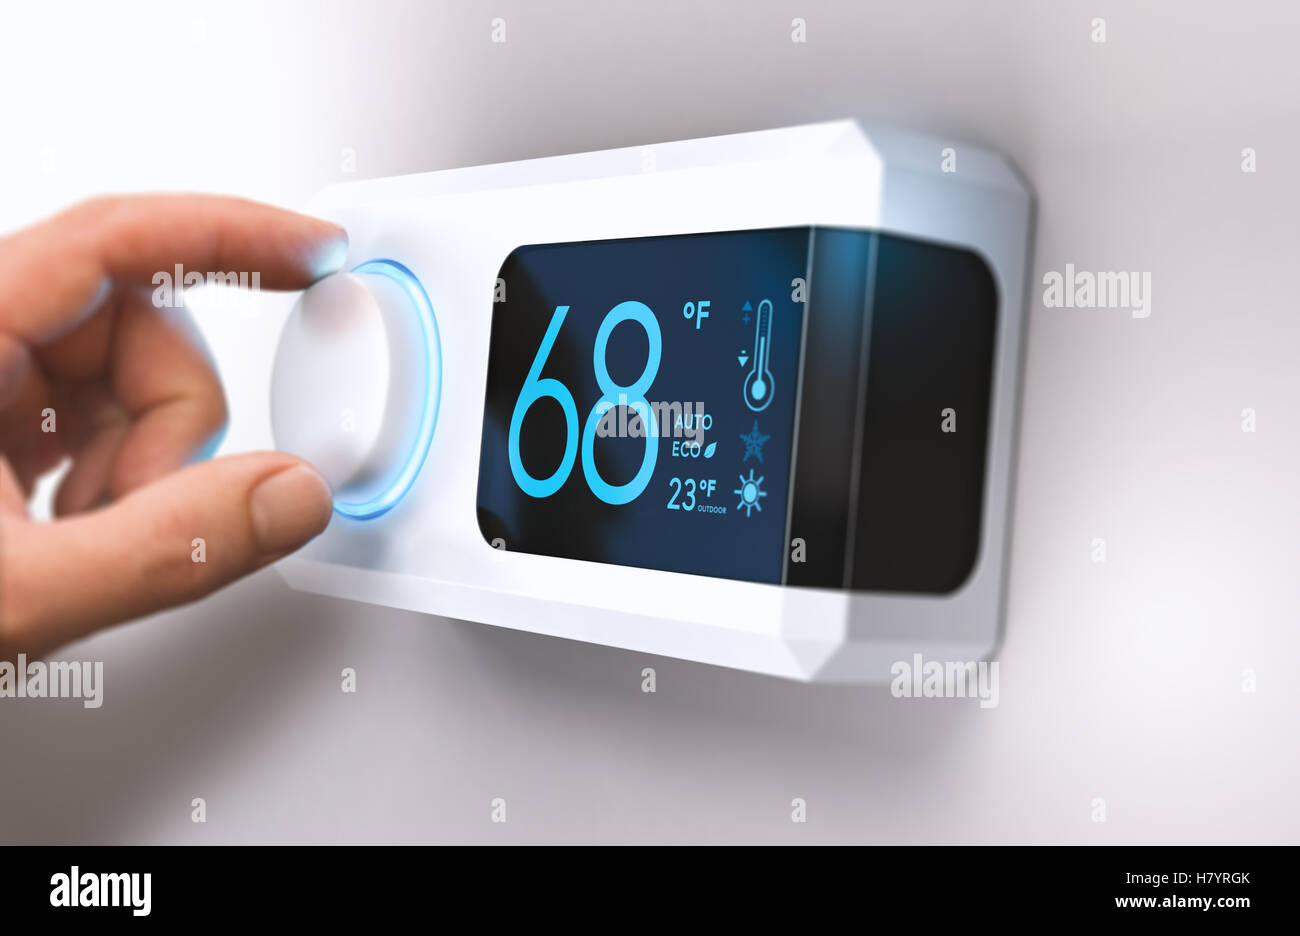 Hand turning a home thermostat knob to set temperature on energy saving mode. fahrenheit units. Composite image between a photog Stock Photo